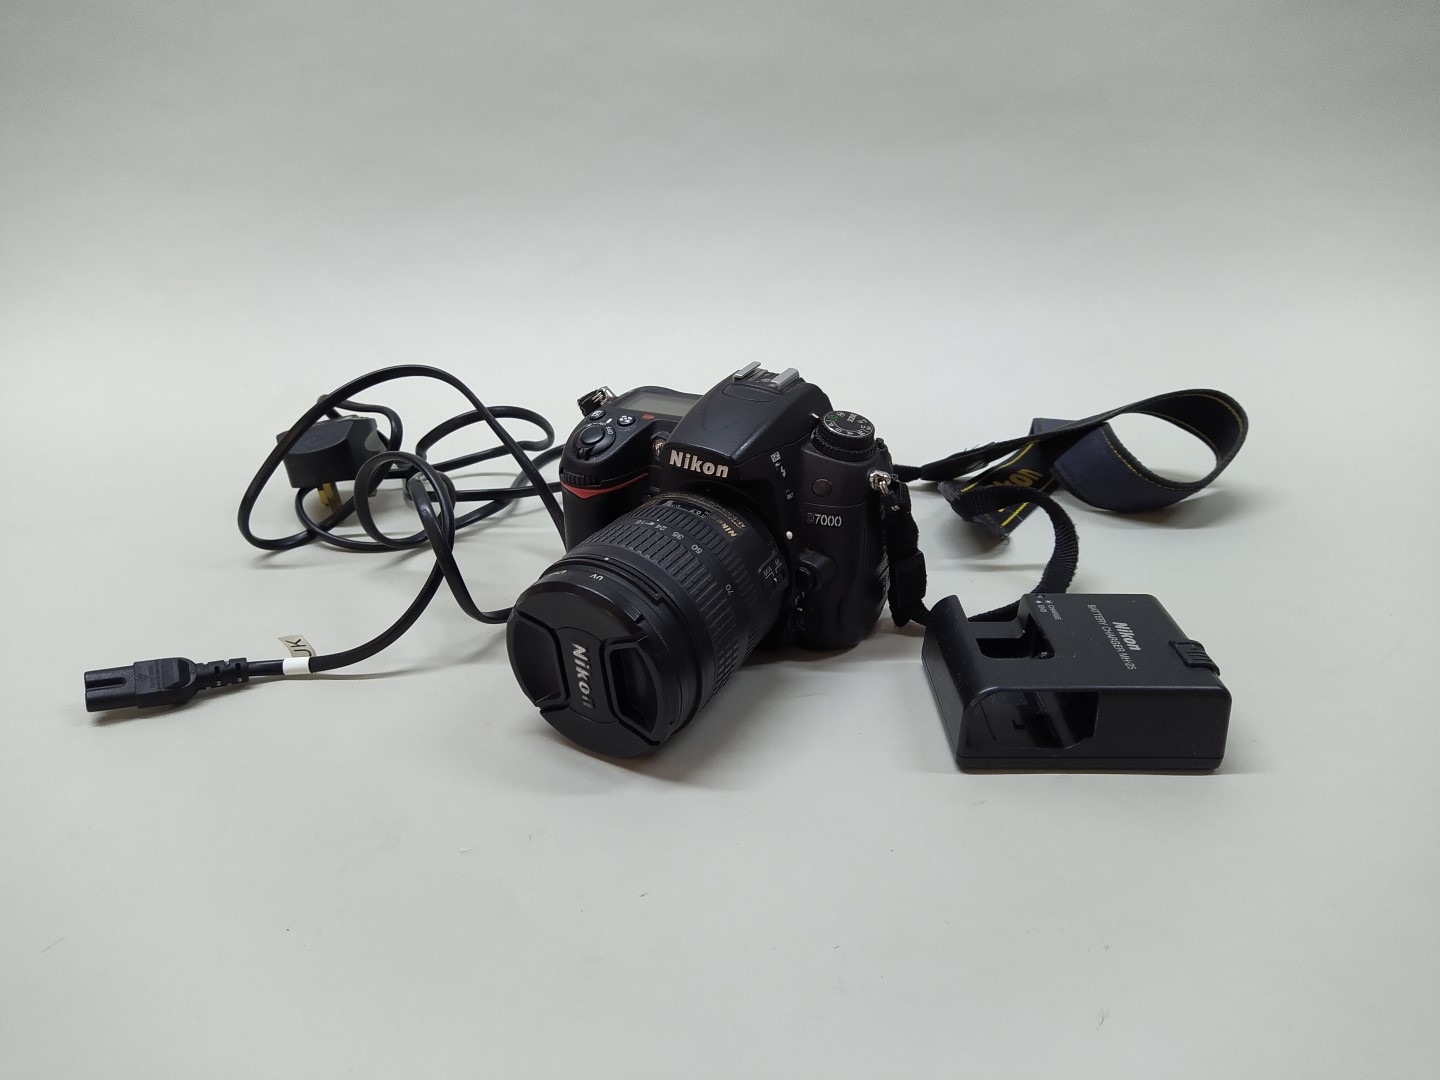 A Nikon D7000 camera body with a Nikon 18-77mm lens and charger in original box - Image 2 of 3